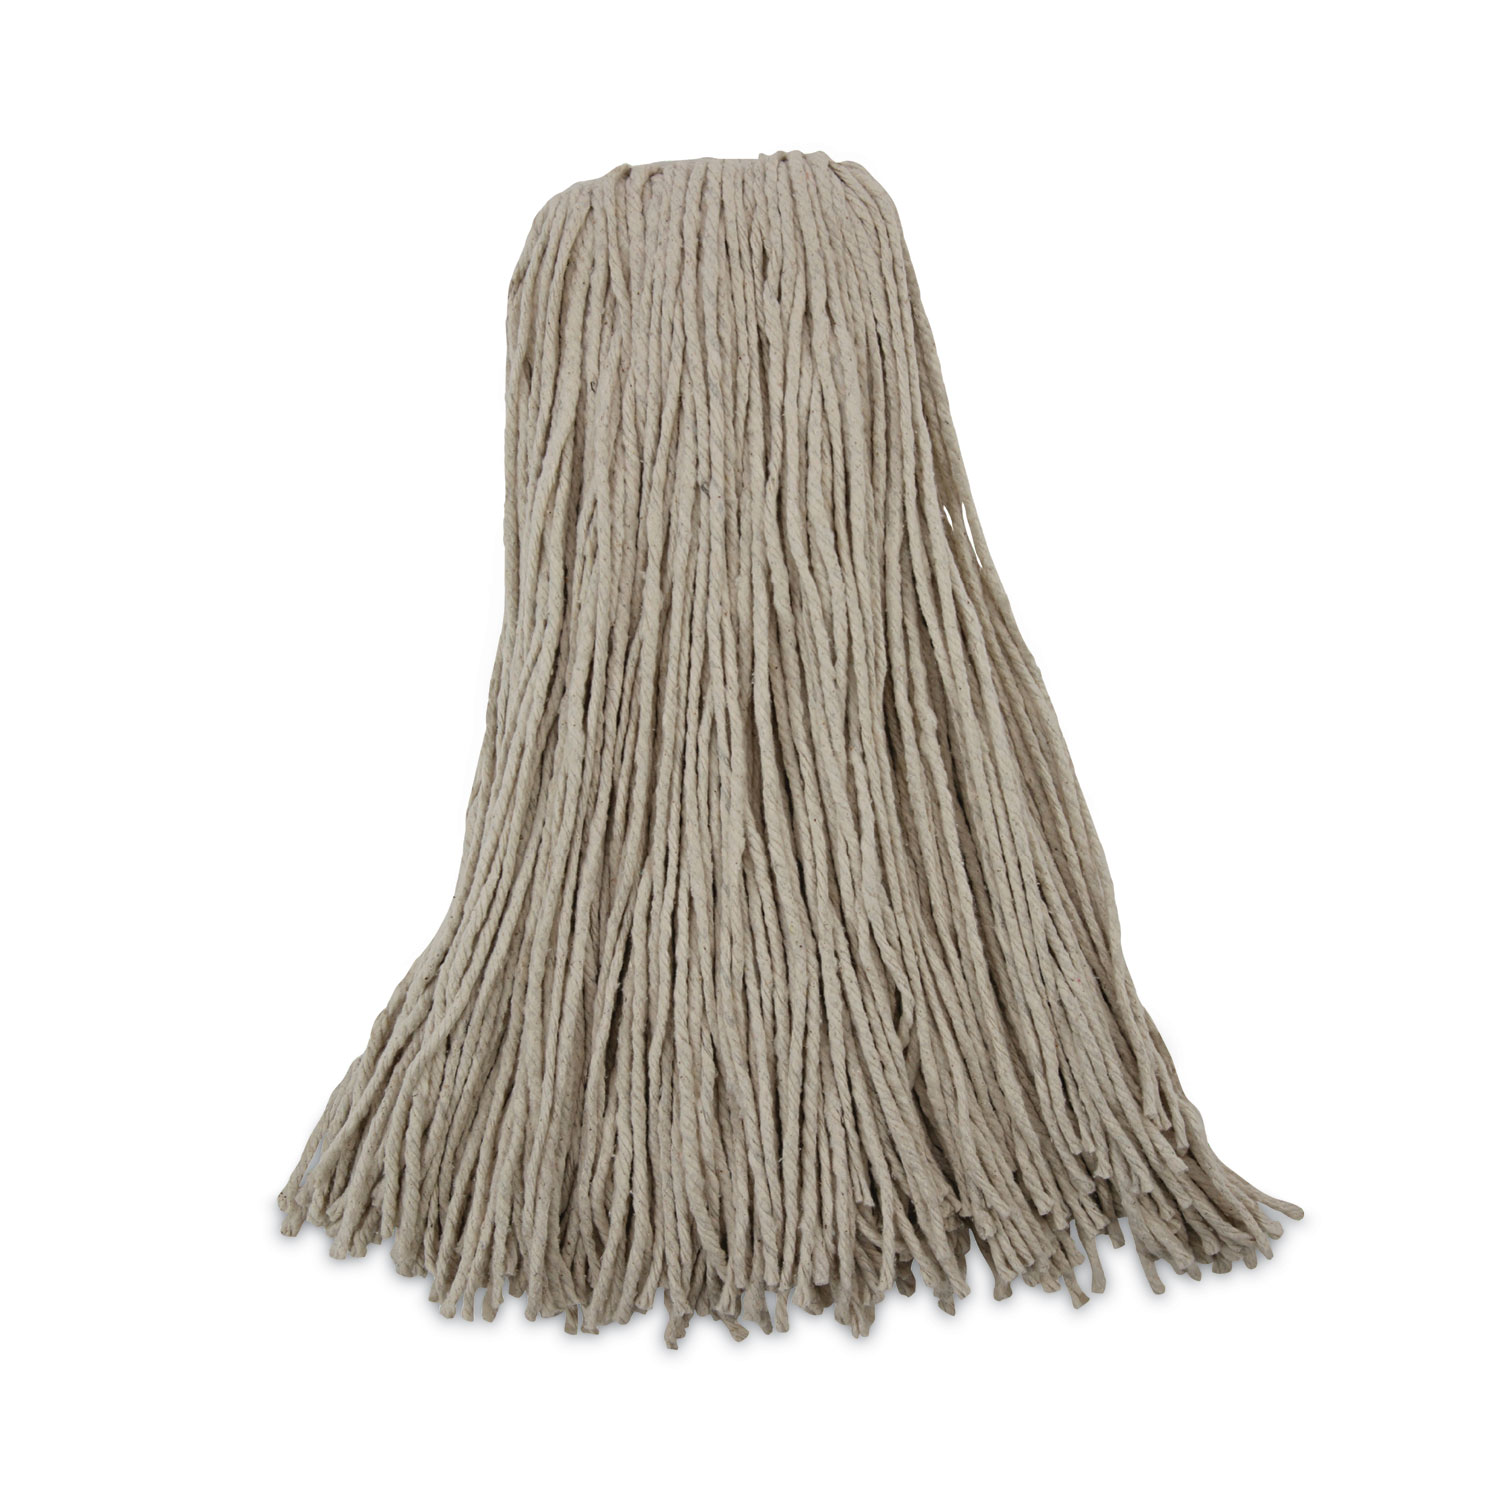 Replacement Mop Head- Silver White Swep Mop